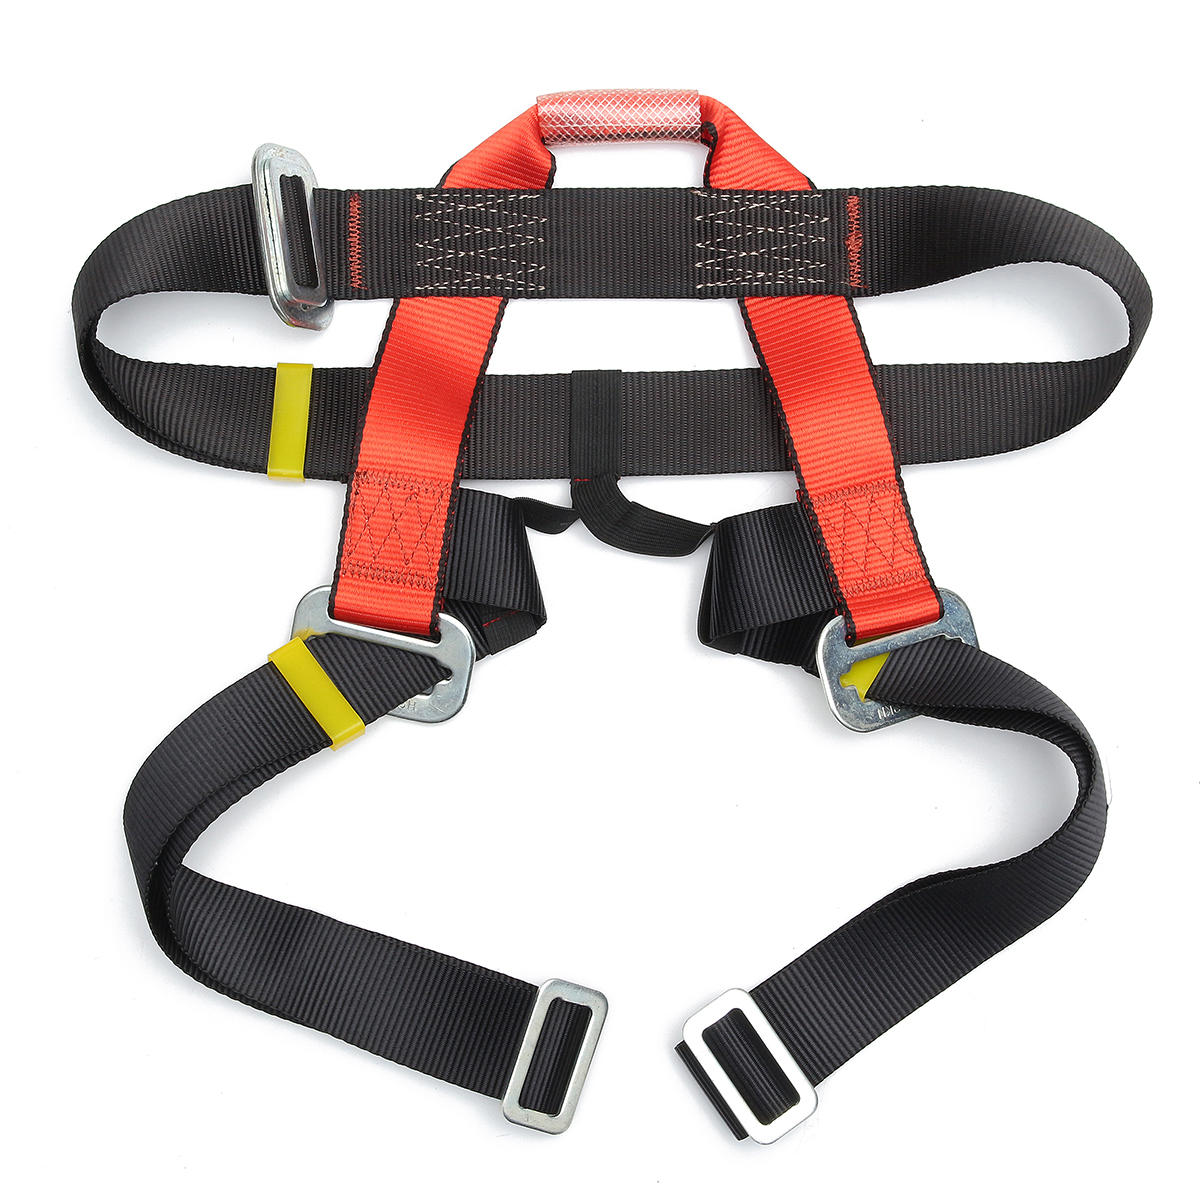 Climbing Harness Safety Seat Belt for Climbing Rappelling Rescue Tool 